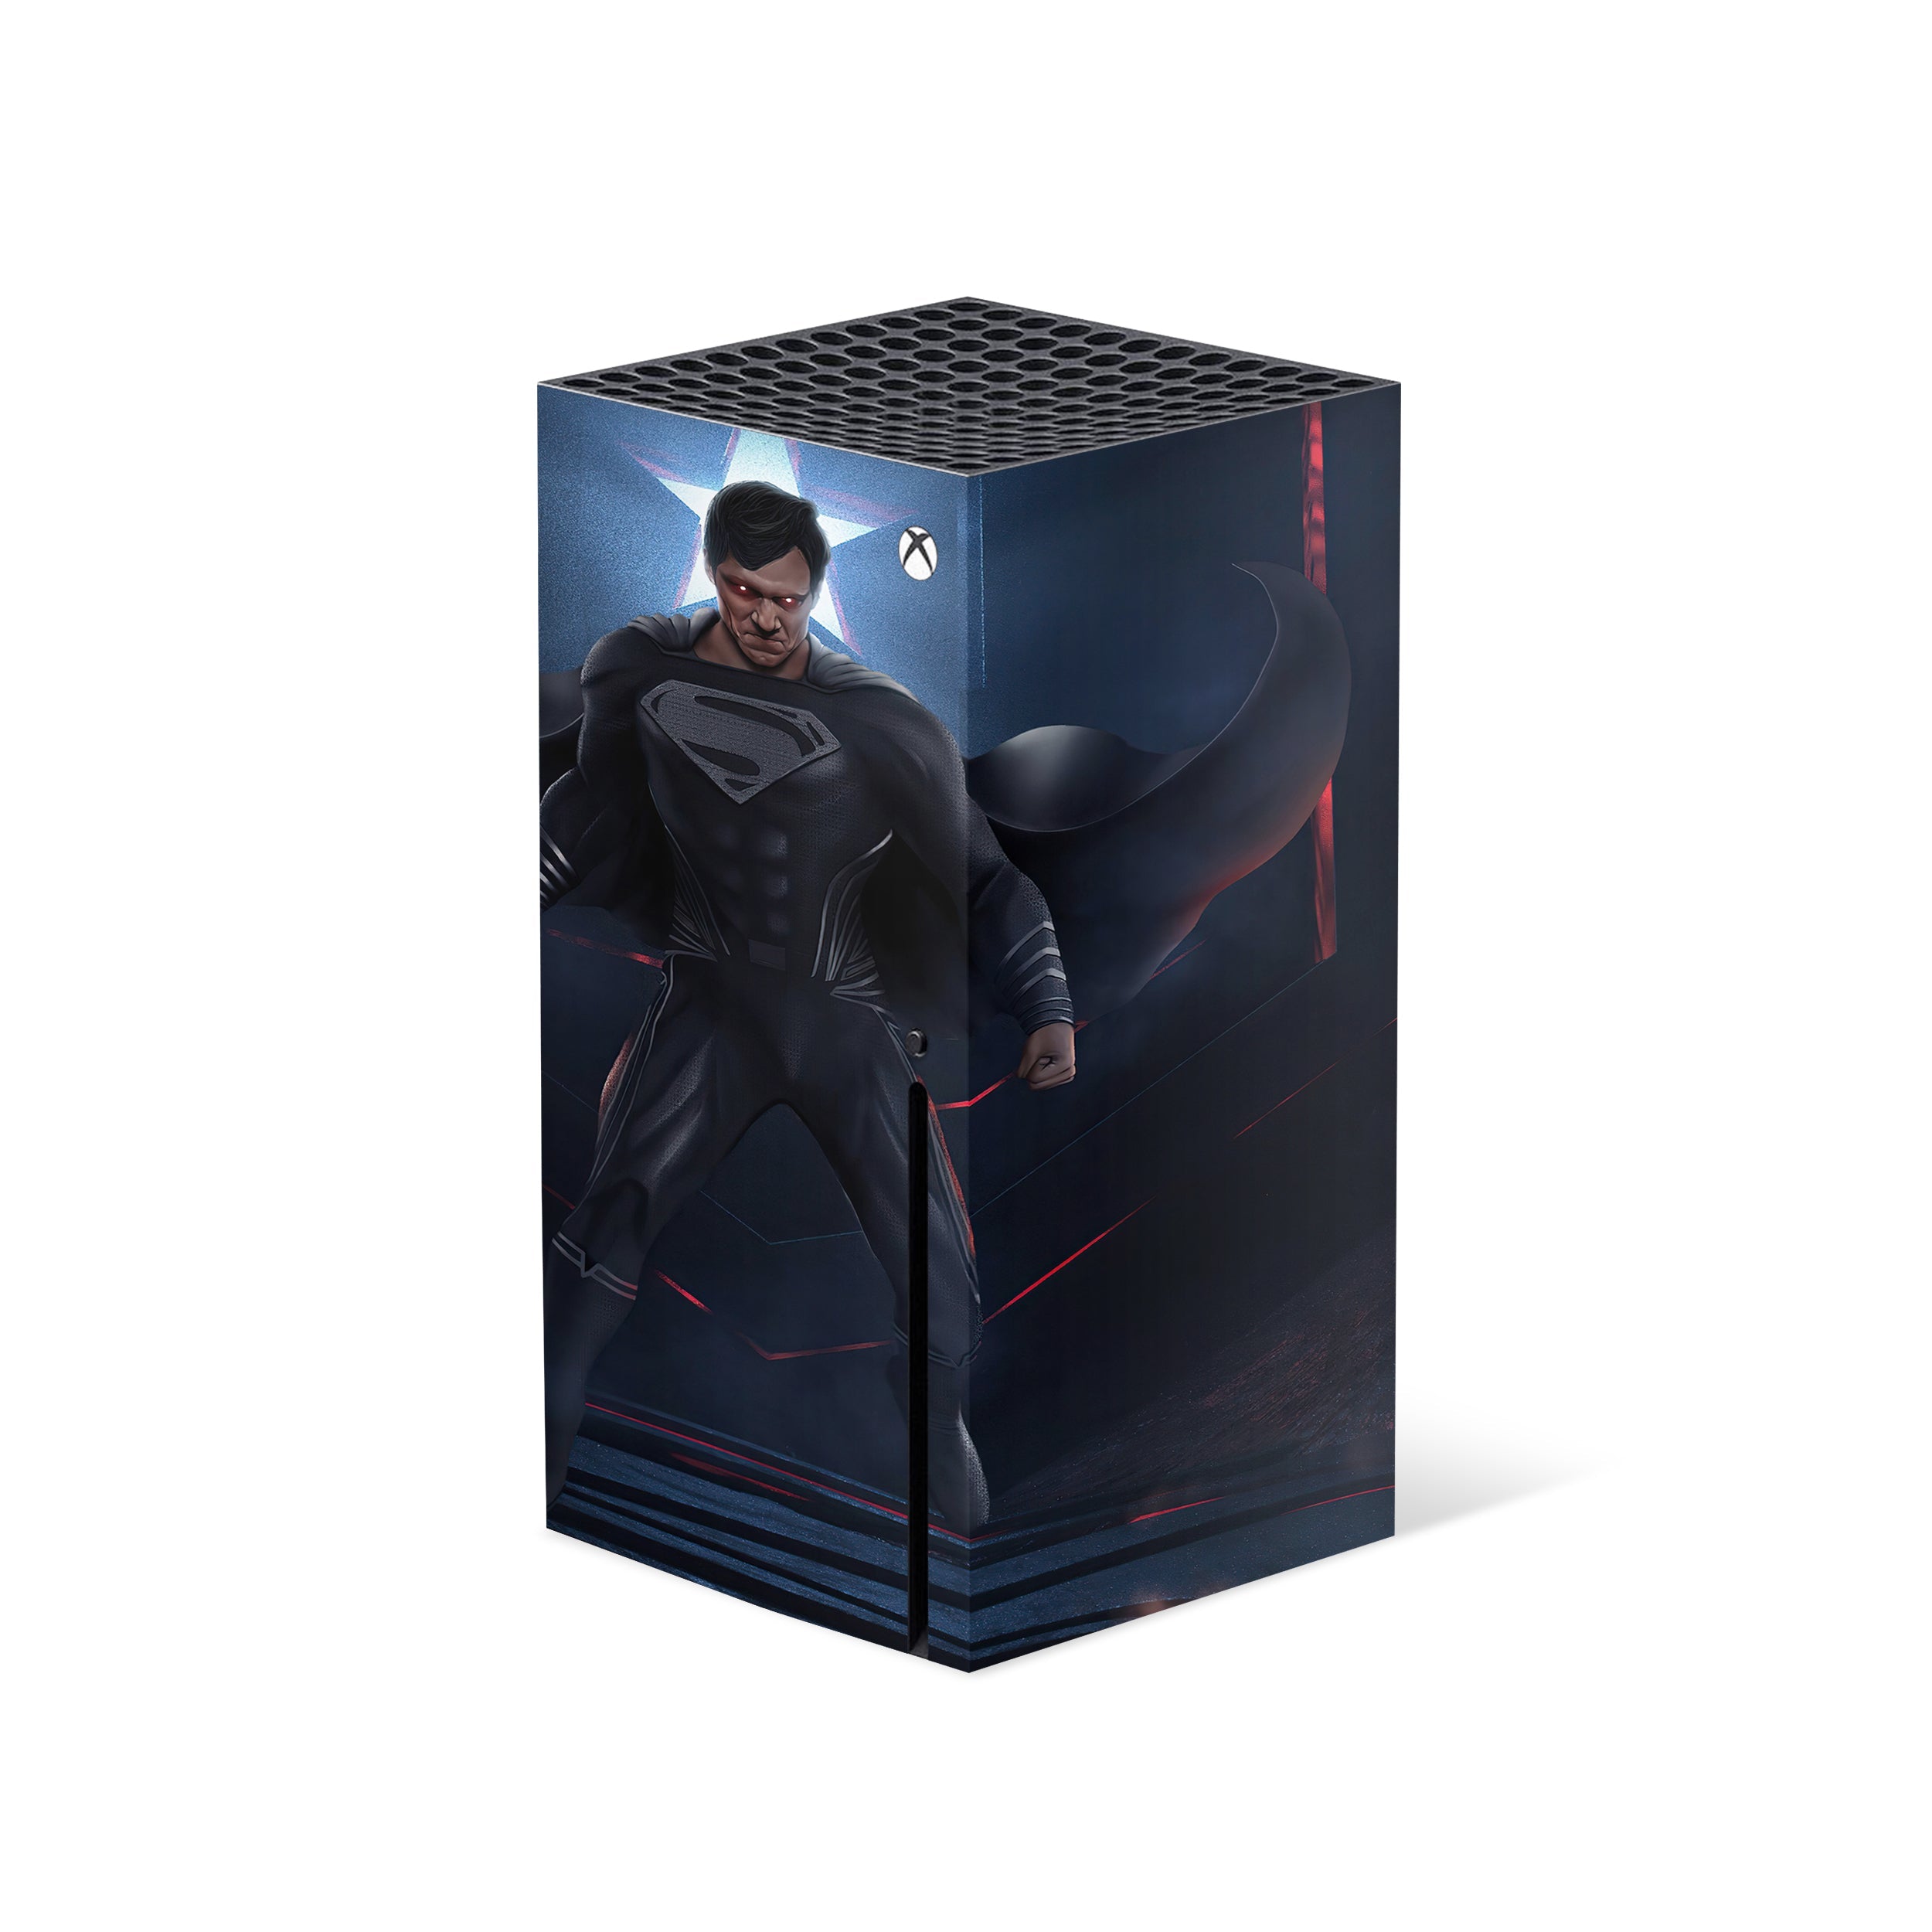 A video game skin featuring a DC Comics Superman design for the Xbox Series X.